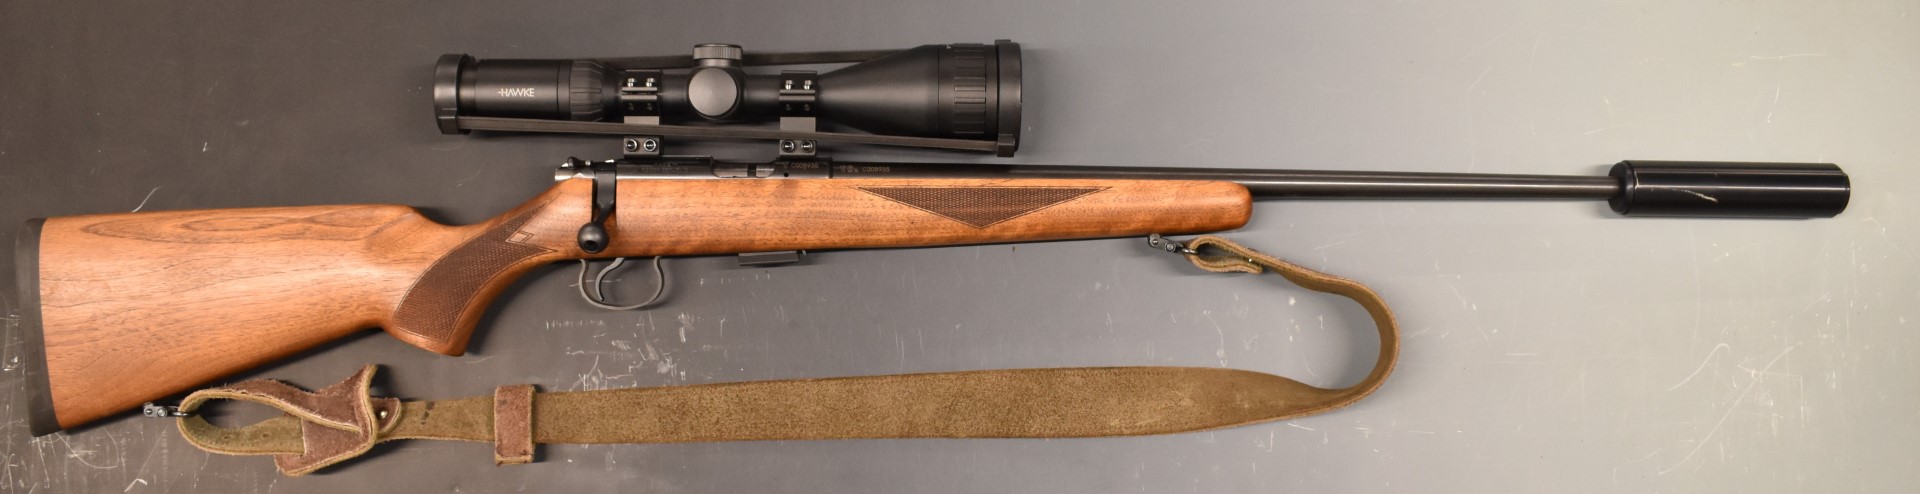 Cogswell & Harrison Certus .22LR semi-automatic rifle with chequered grip and forend, leather sling, - Image 2 of 3